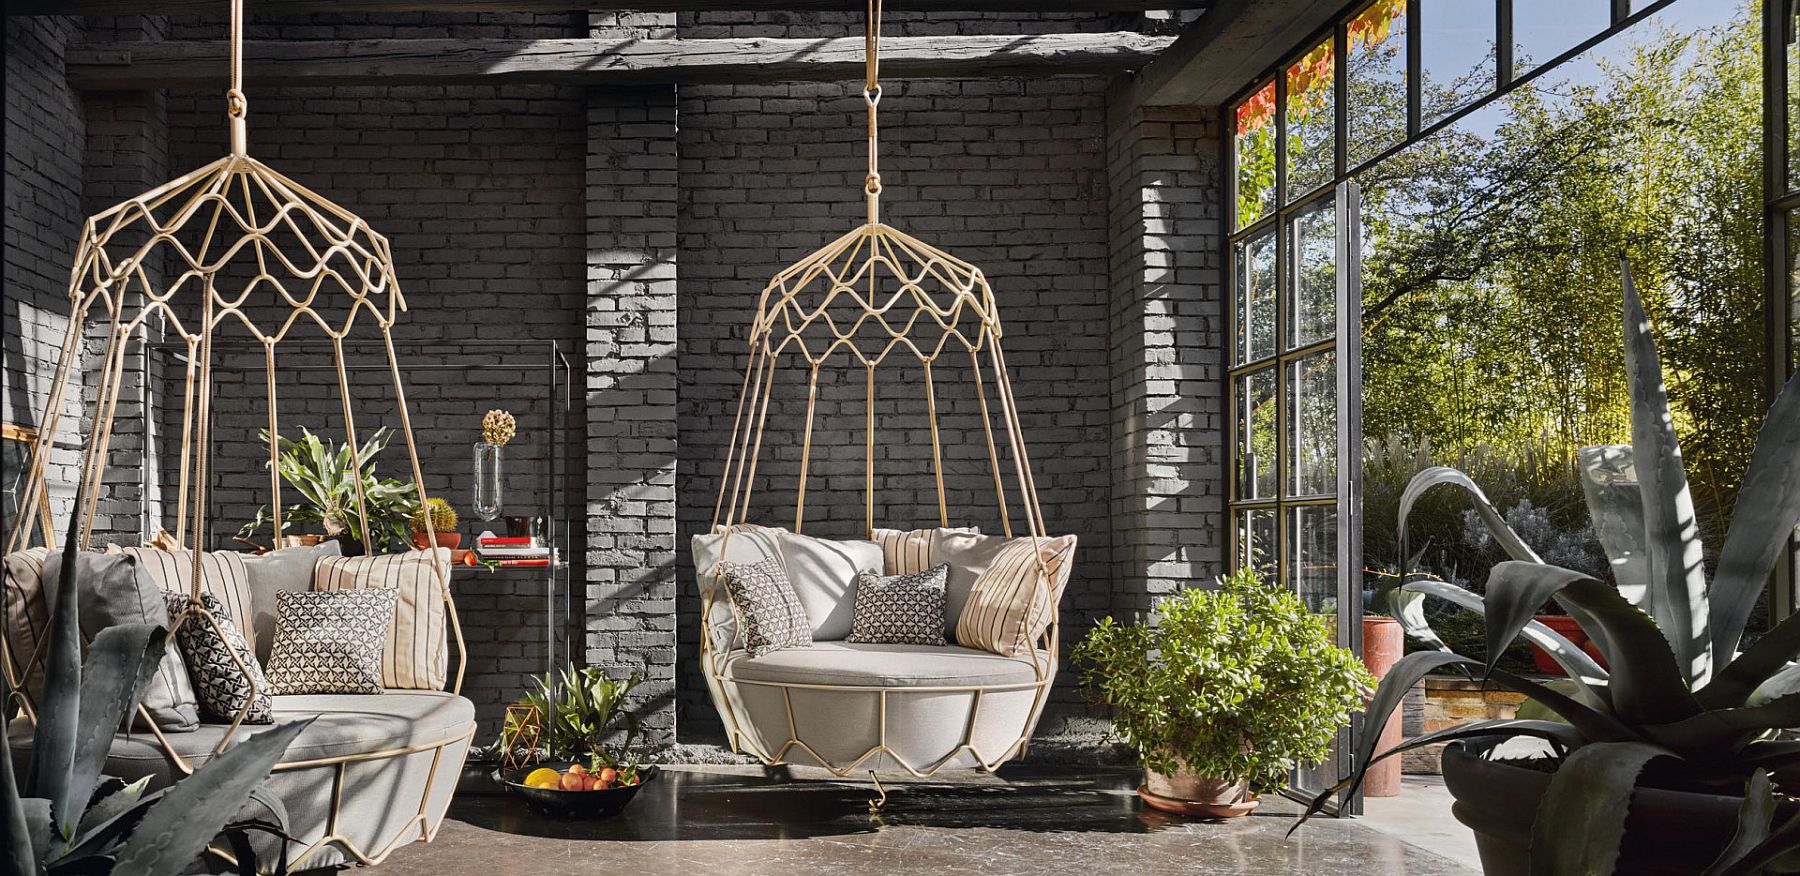 Comfy-swinging-outdoor-sofa-Gravity-is-perfect-for-the-sunroom